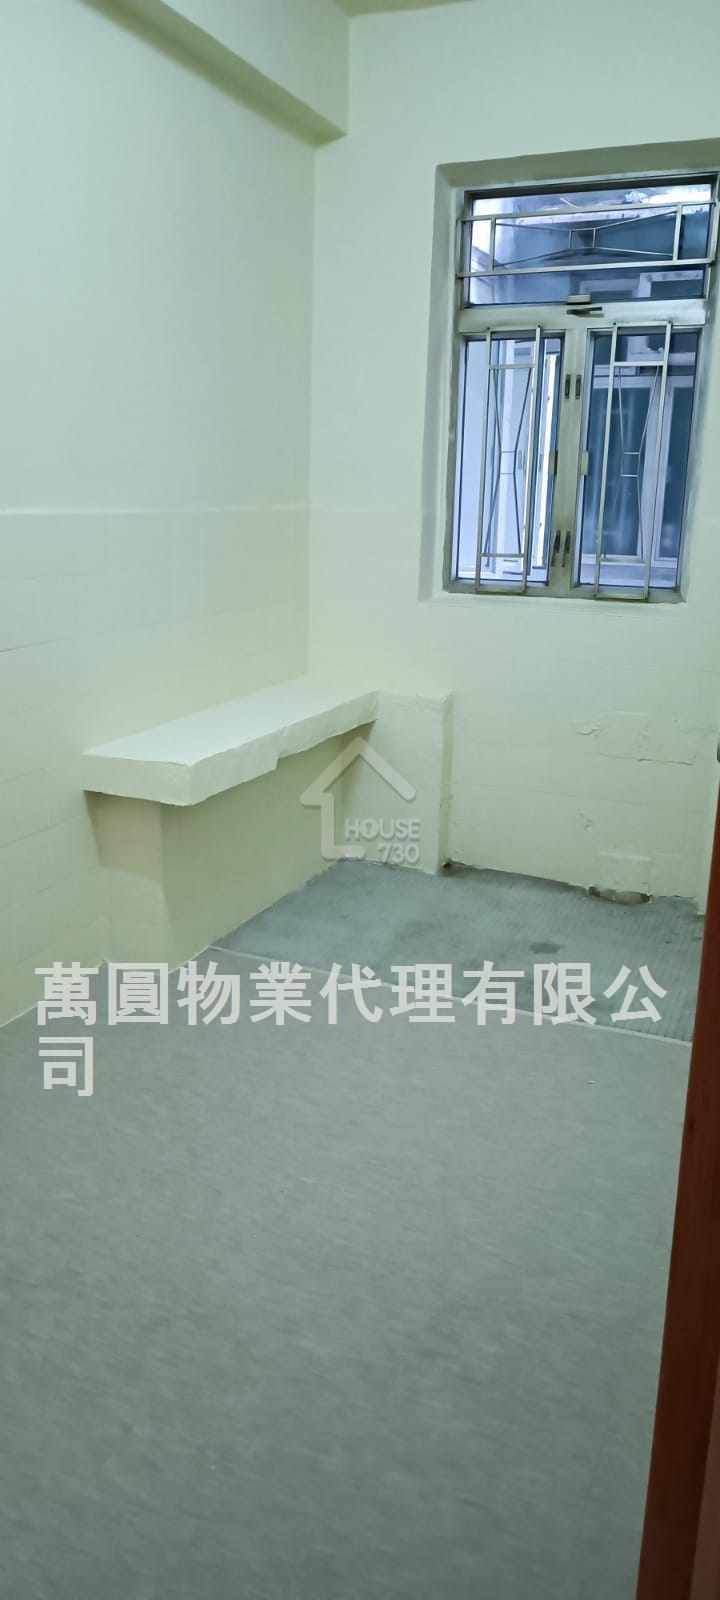 Tai Kok Tsui CHUNG HING BUILDING Middle Floor Bedroom 1 House730-6238277